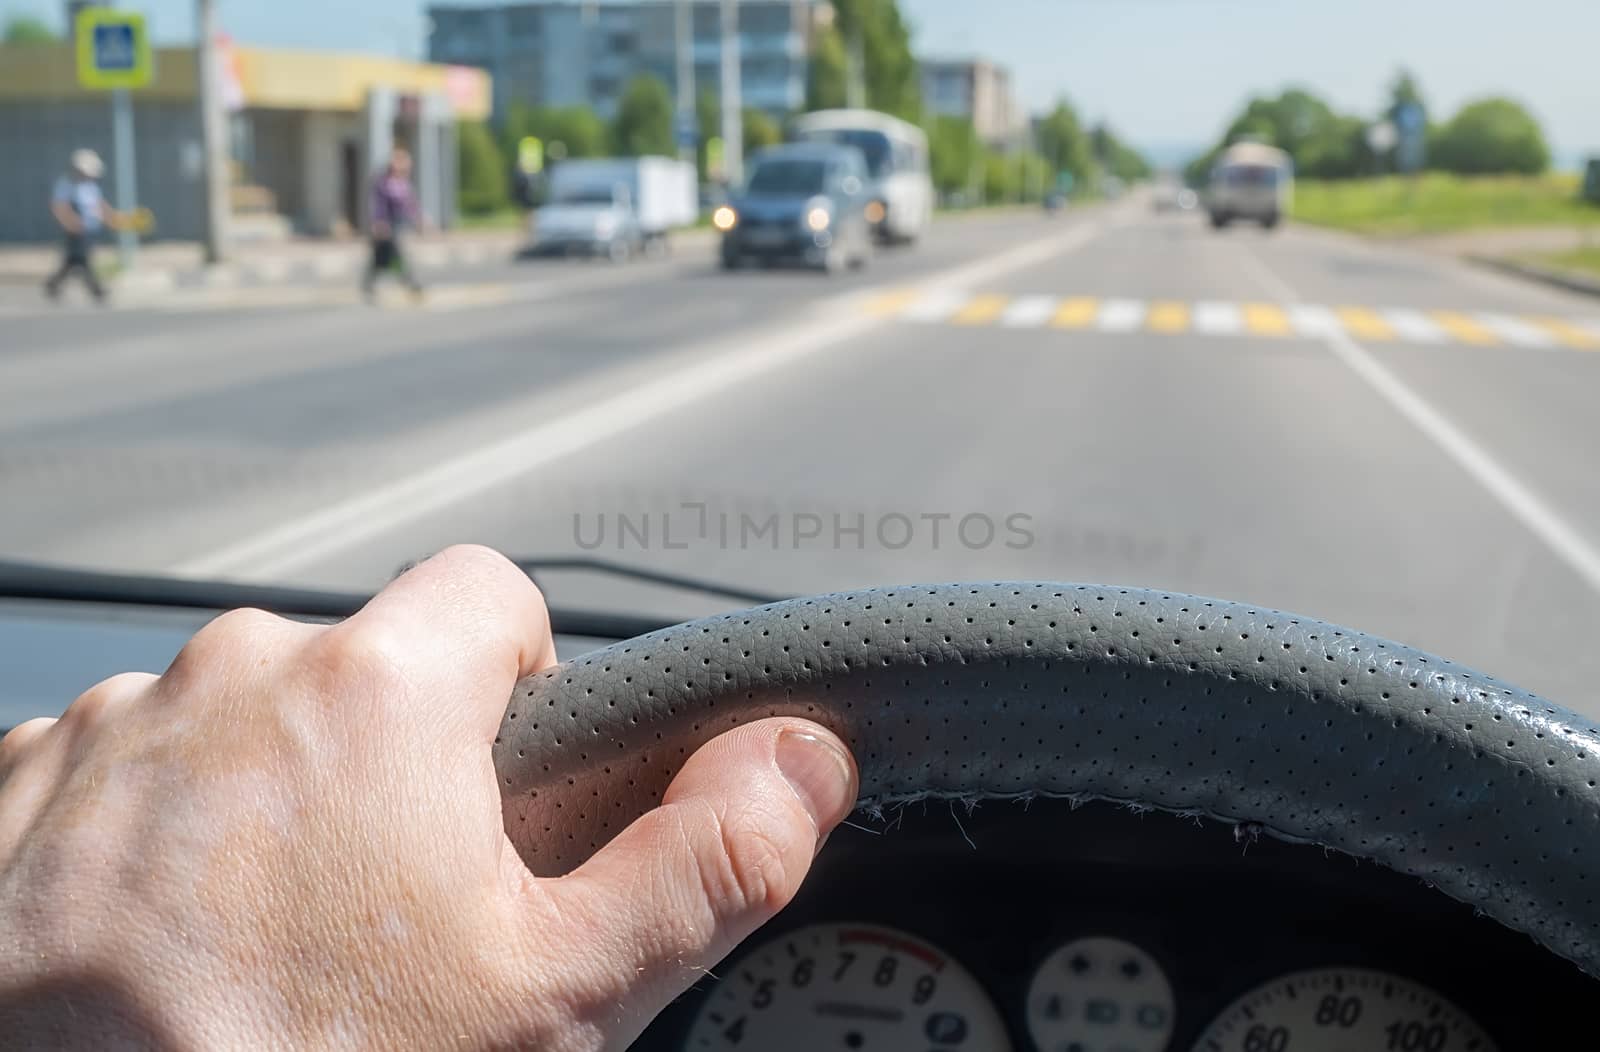 the driver hand on the steering wheel of a car approaching a pedestrian crossing where pedestrians